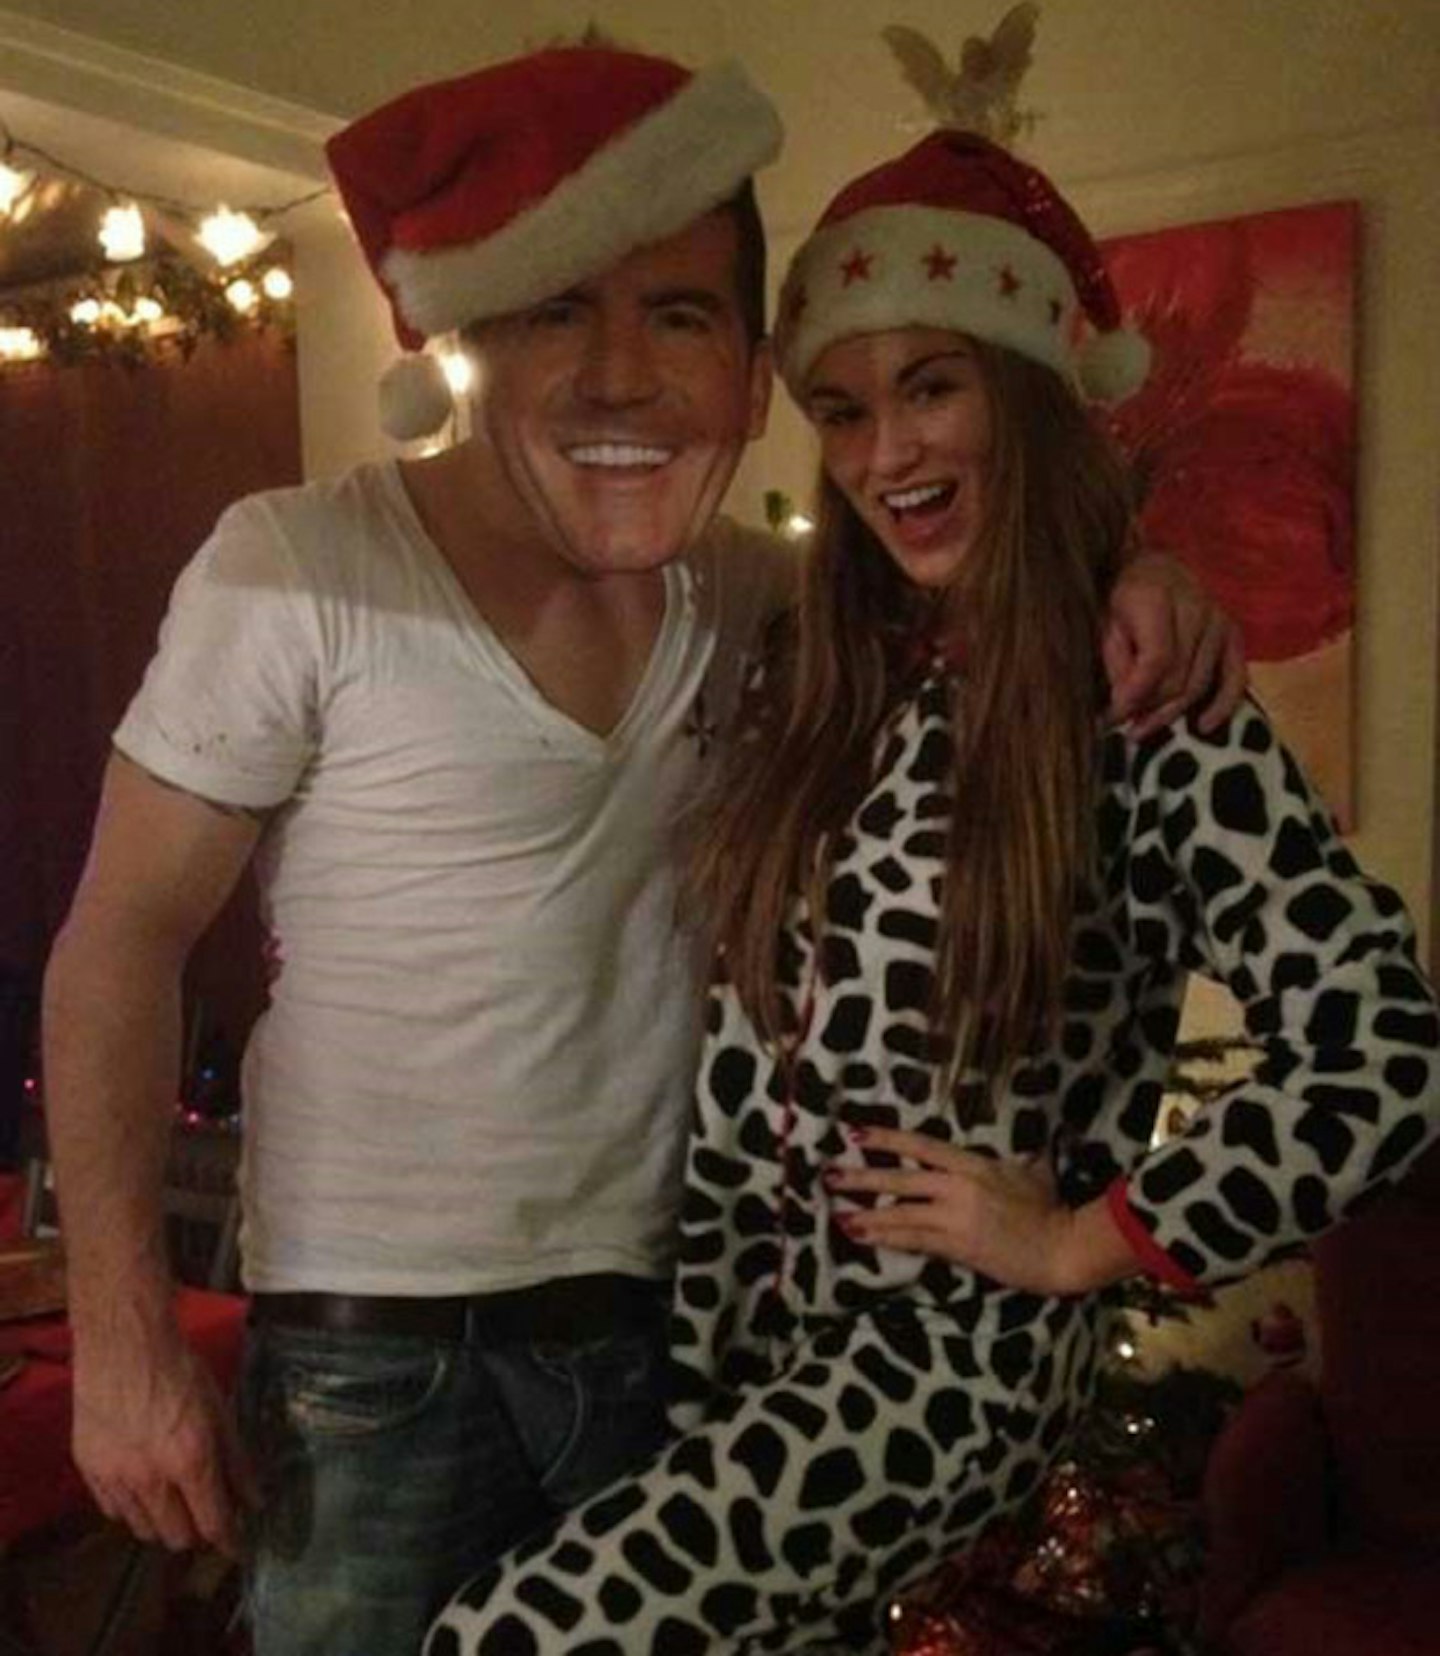 Amy Willerton and Simon Cowell. Oh wait...